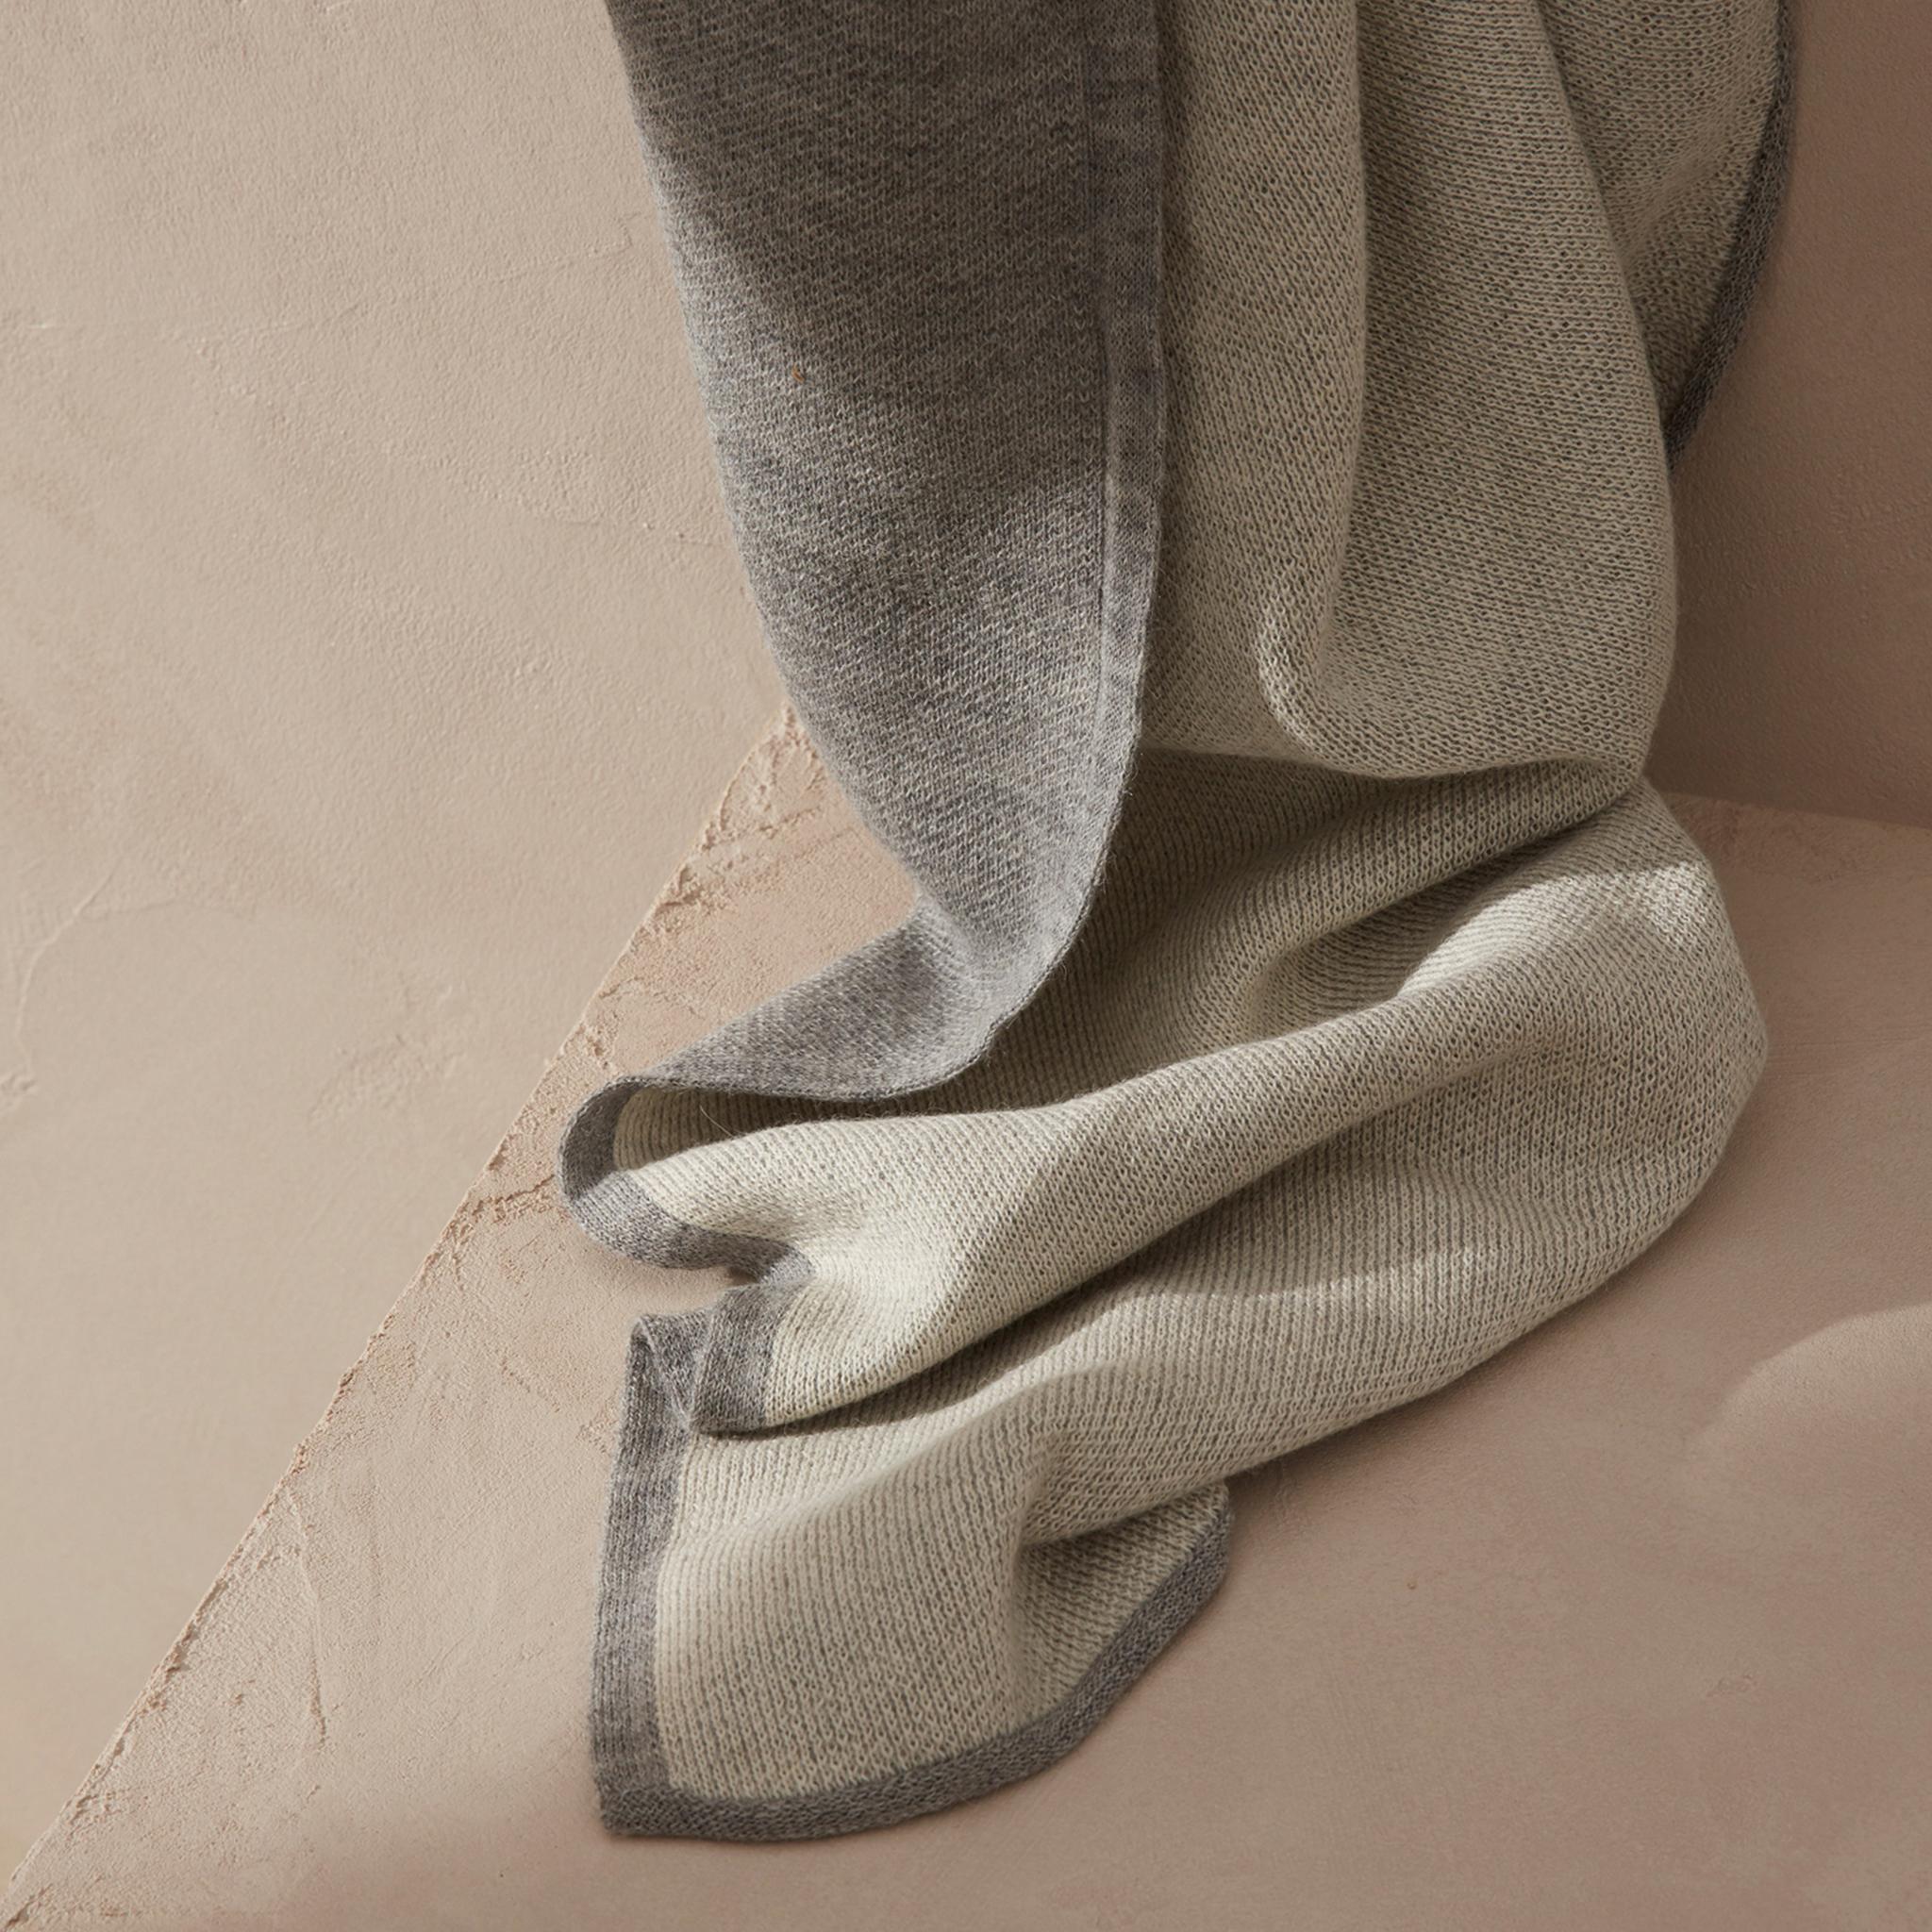 About

The Dane throw by Fells Andes is designed in San Francisco and handmade in the Andes, supporting local culture and craft. Made from 100% Royal Baby Alpaca – one of the finest, most luxurious materials in the world – it is extremely soft yet